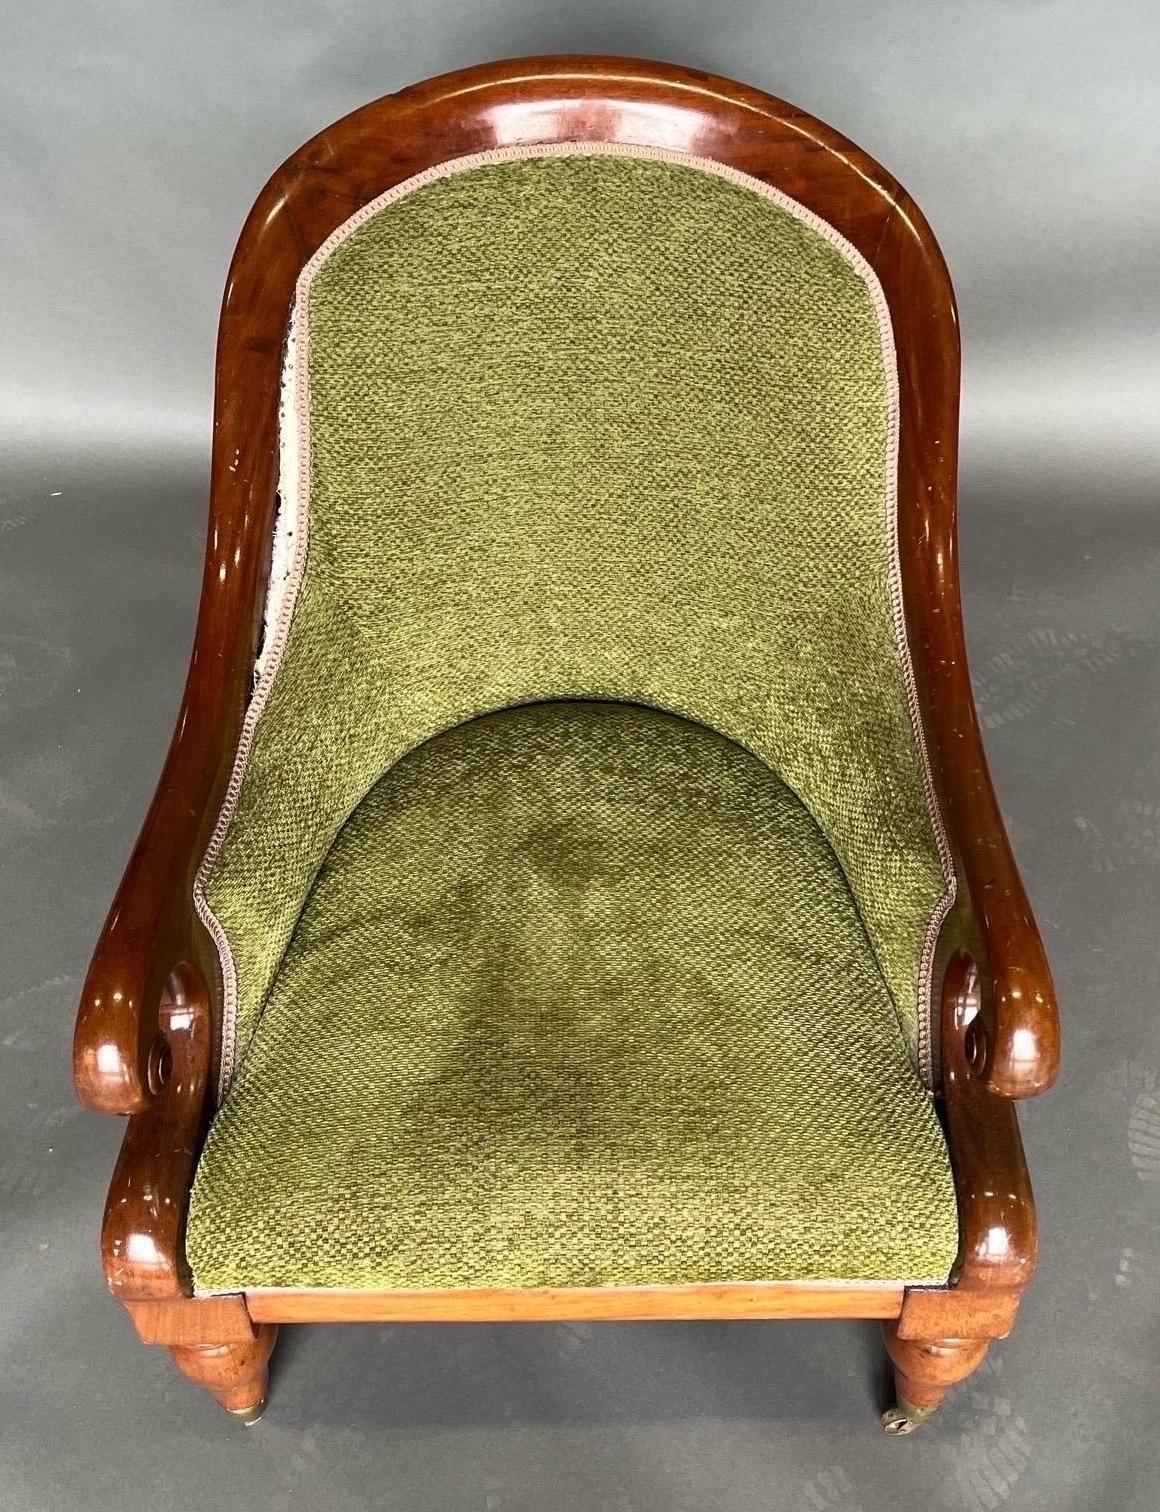 19th century English Mahogany Library Chair  In Good Condition For Sale In Charleston, SC